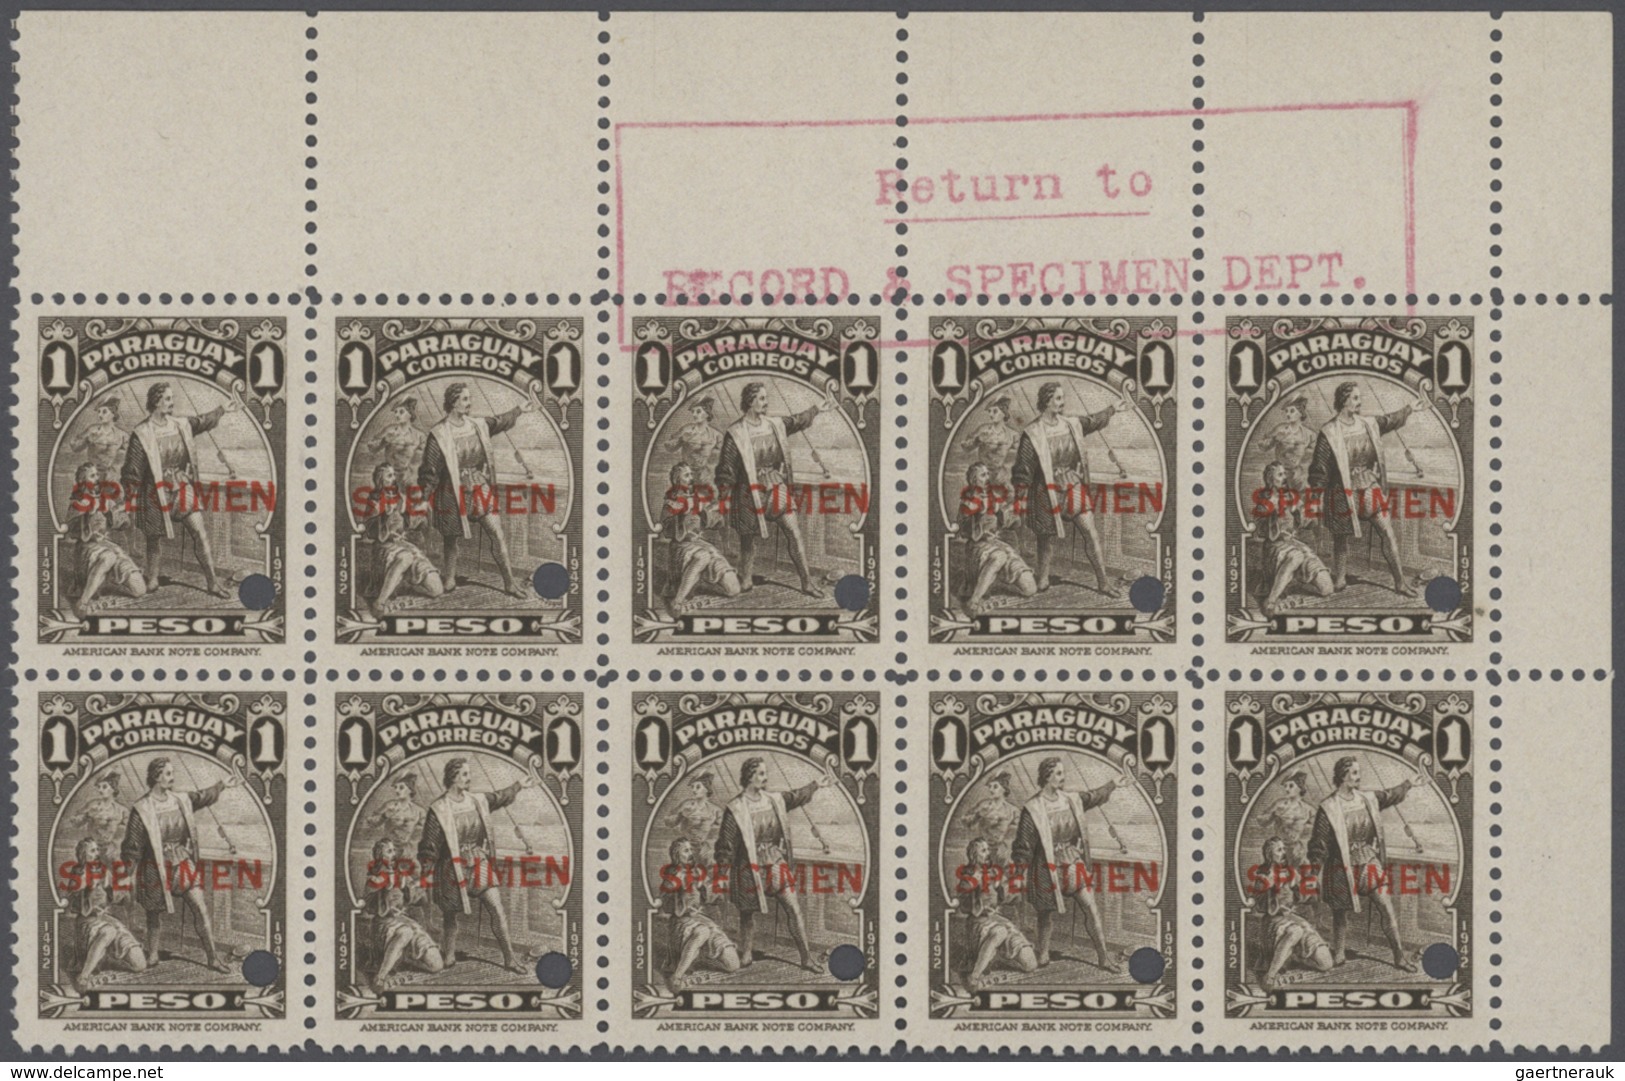 Paraguay: 1943: Columbus Issue , 4 Values, Each Block Of 10, Overprinted SPECIMEN And Punch Hole, Wi - Paraguay